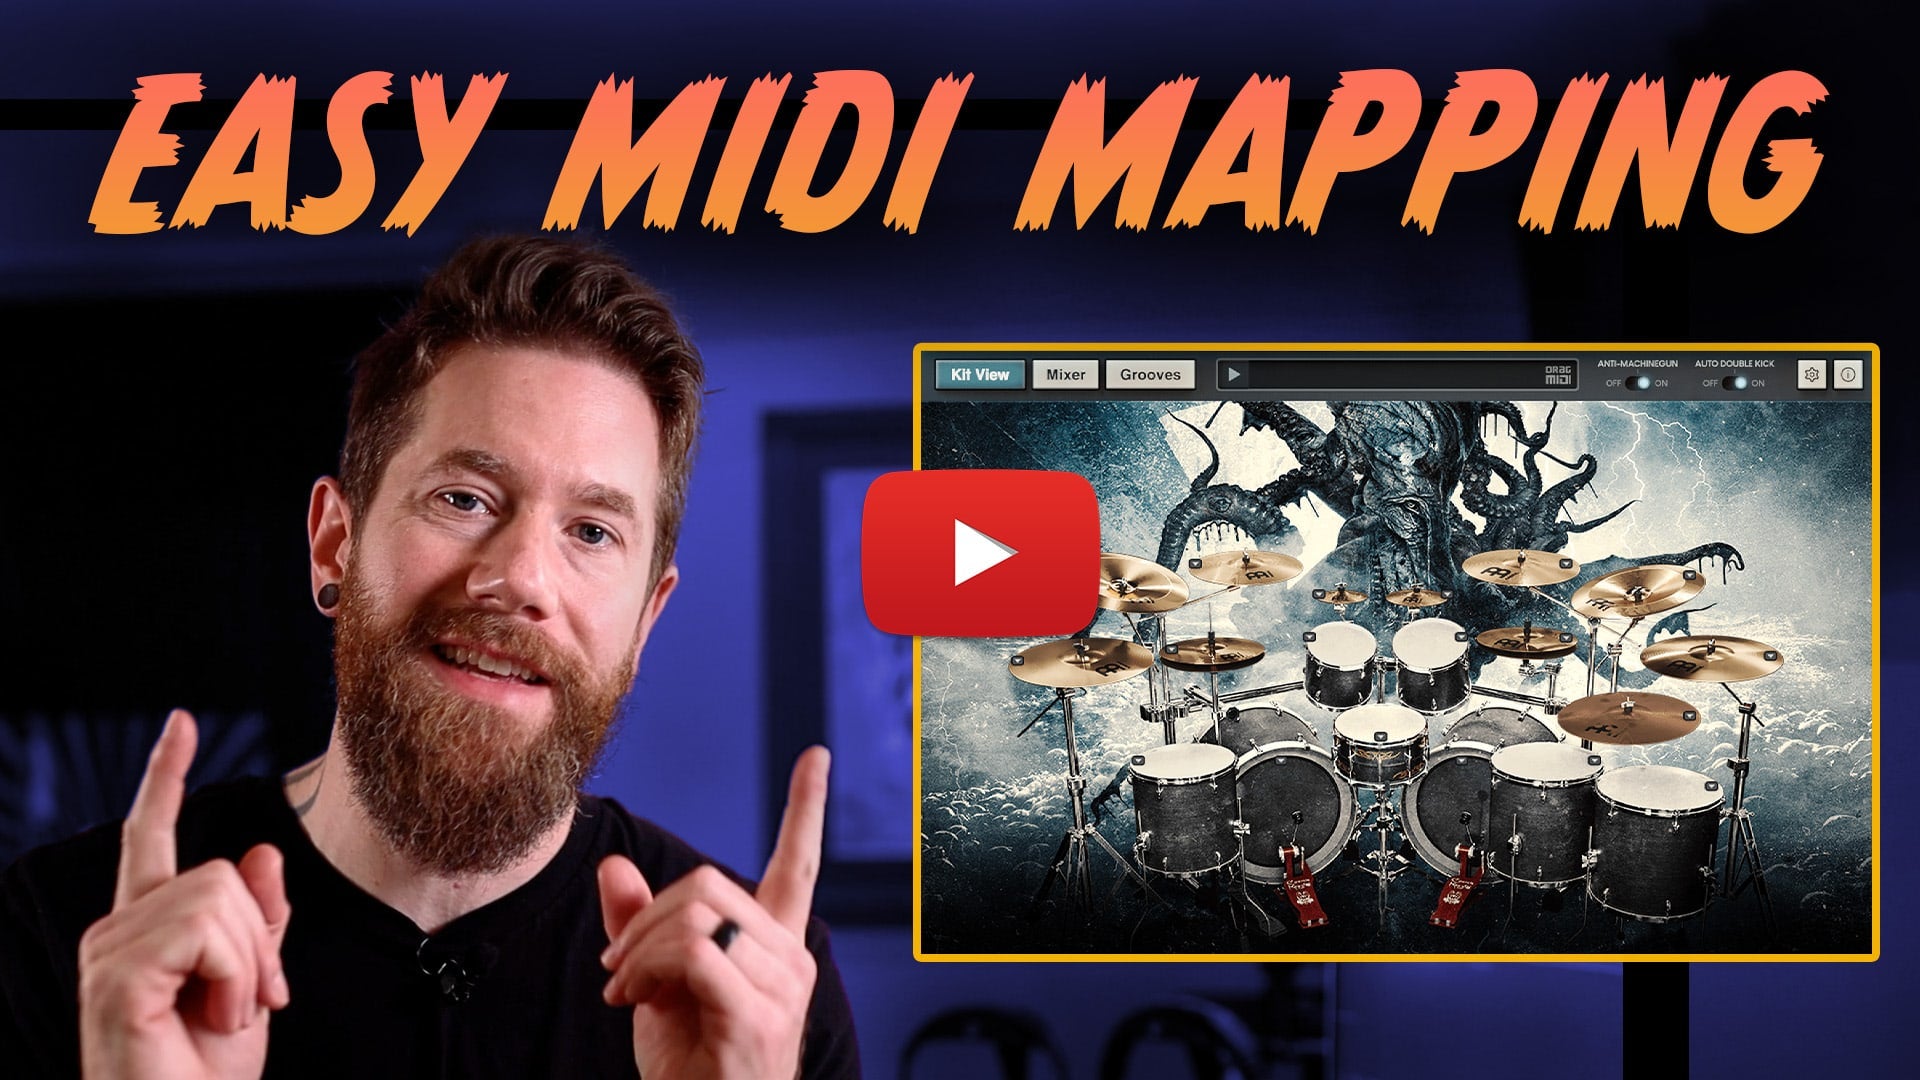 Instantly hear your songs with Krimh Drums - MIDI mapping